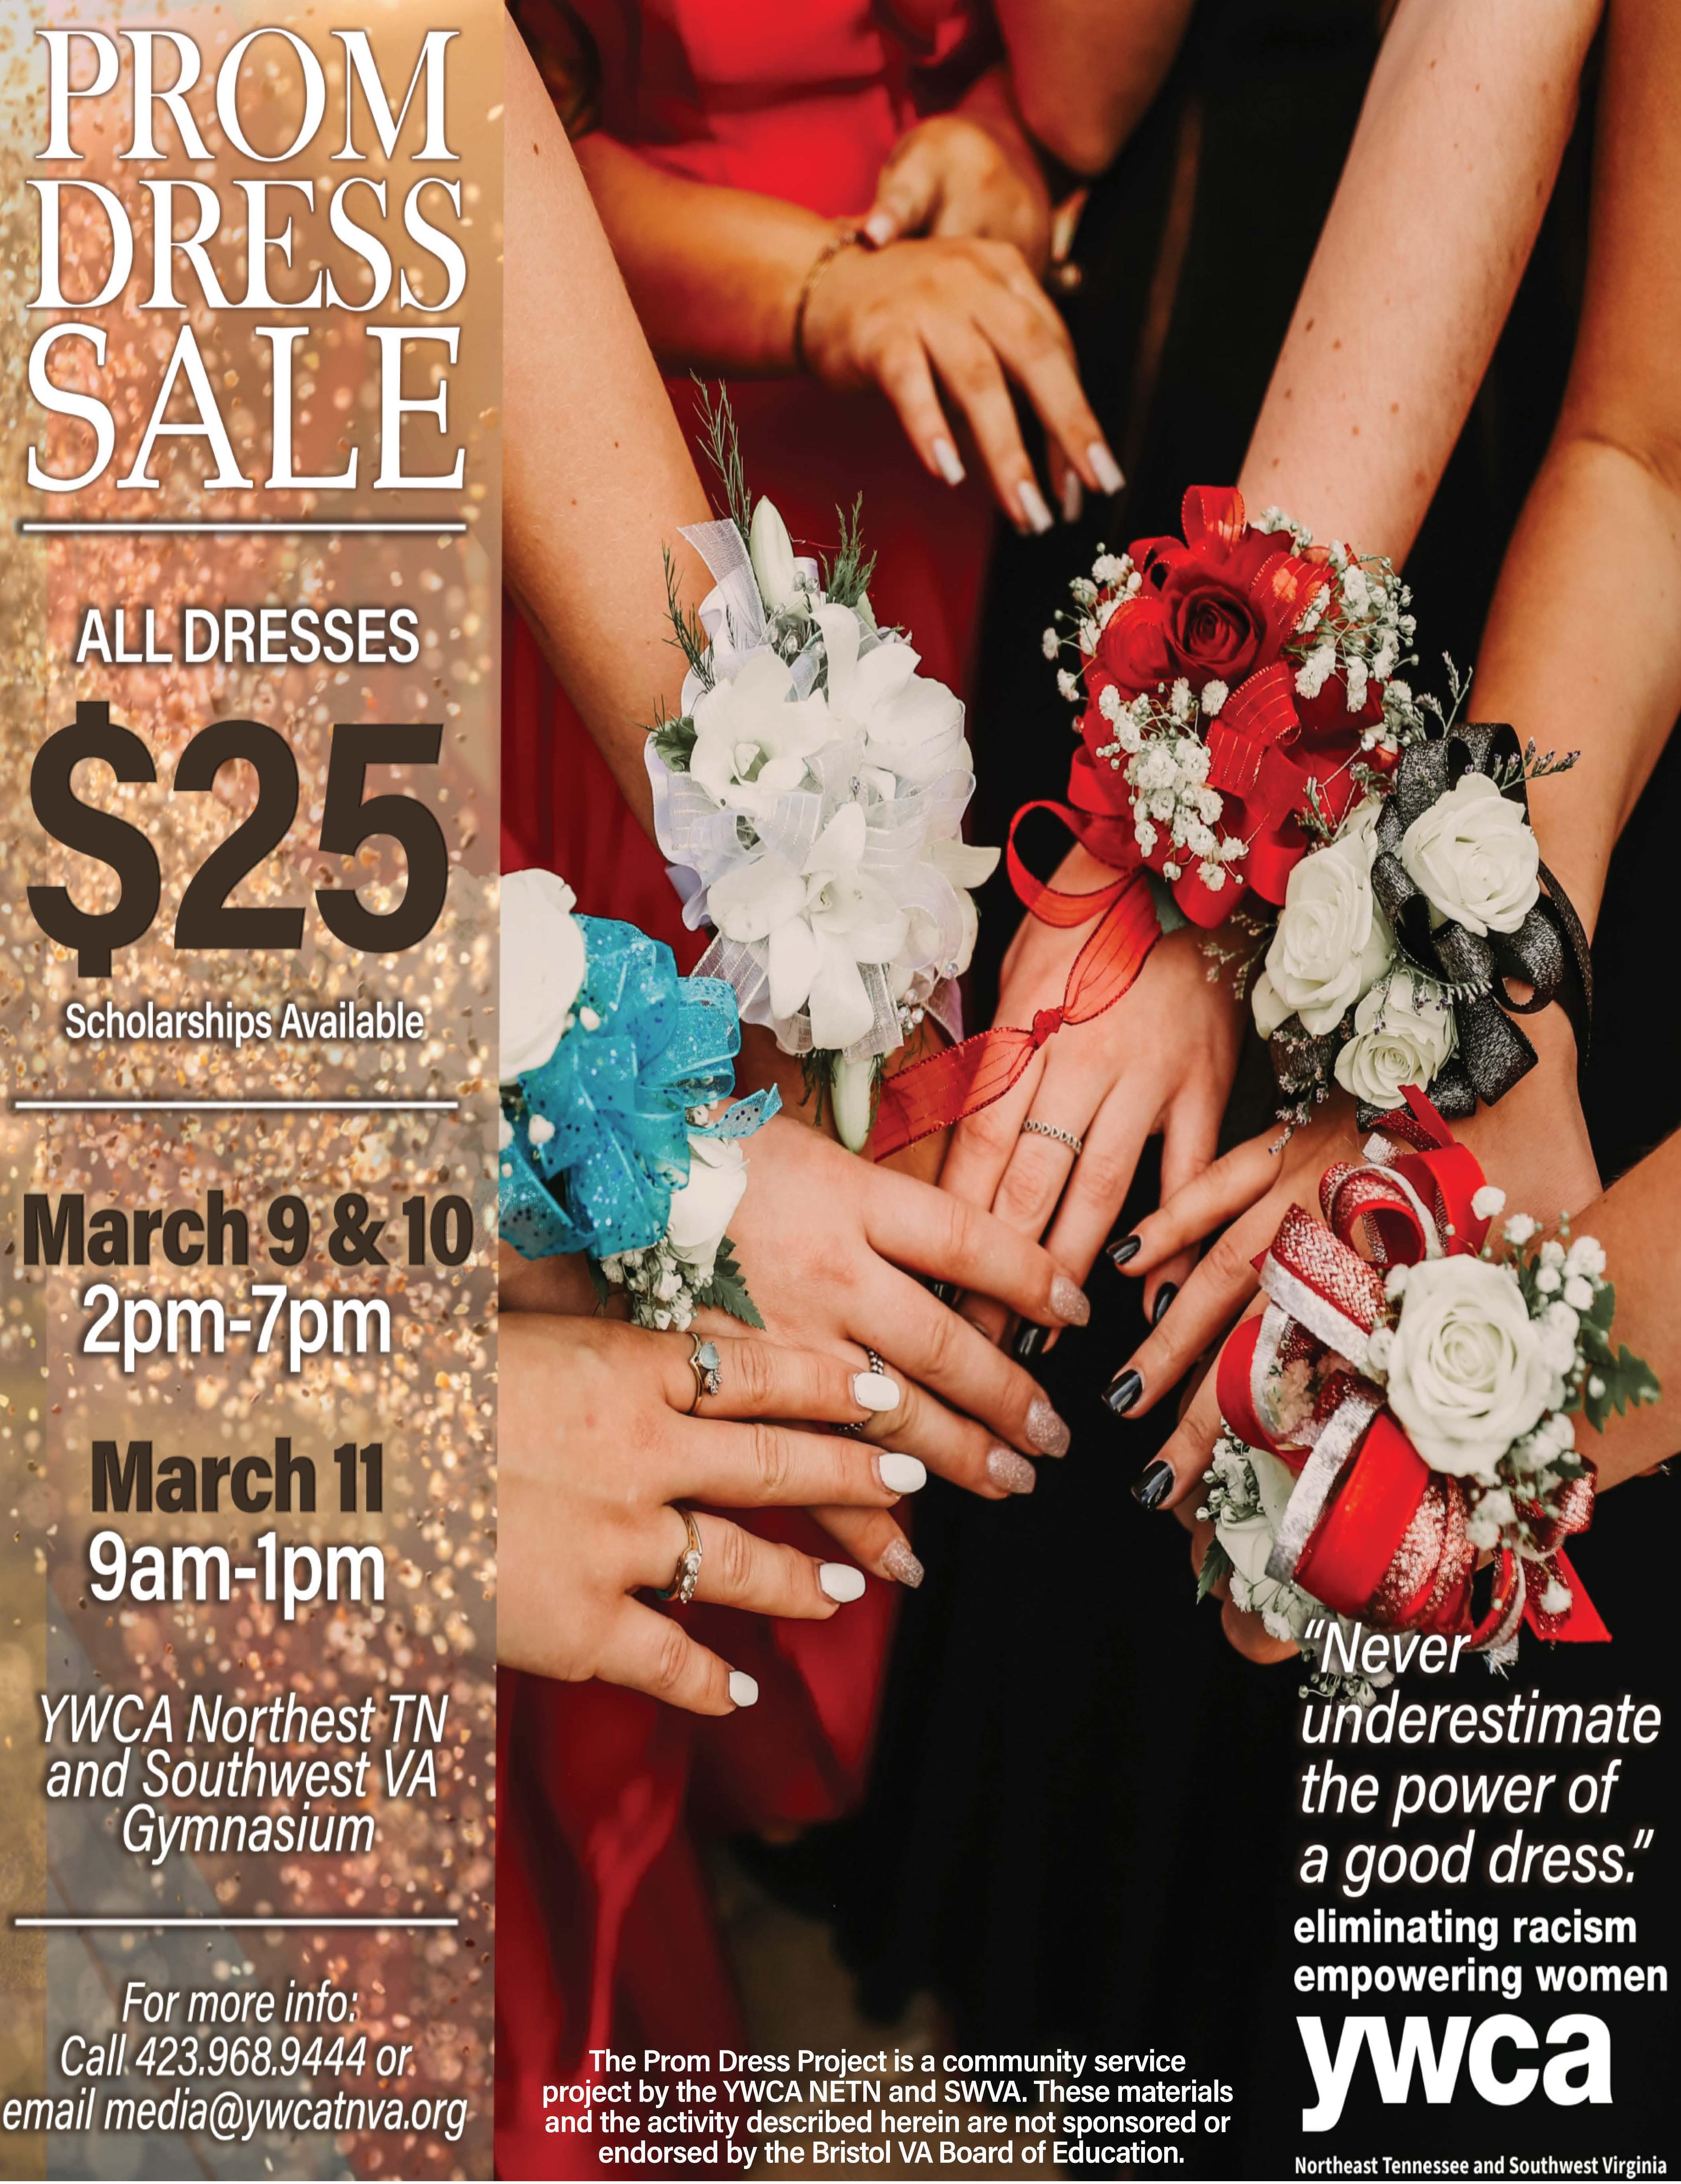 YWCA Prom Dress Sale March 9 and 10